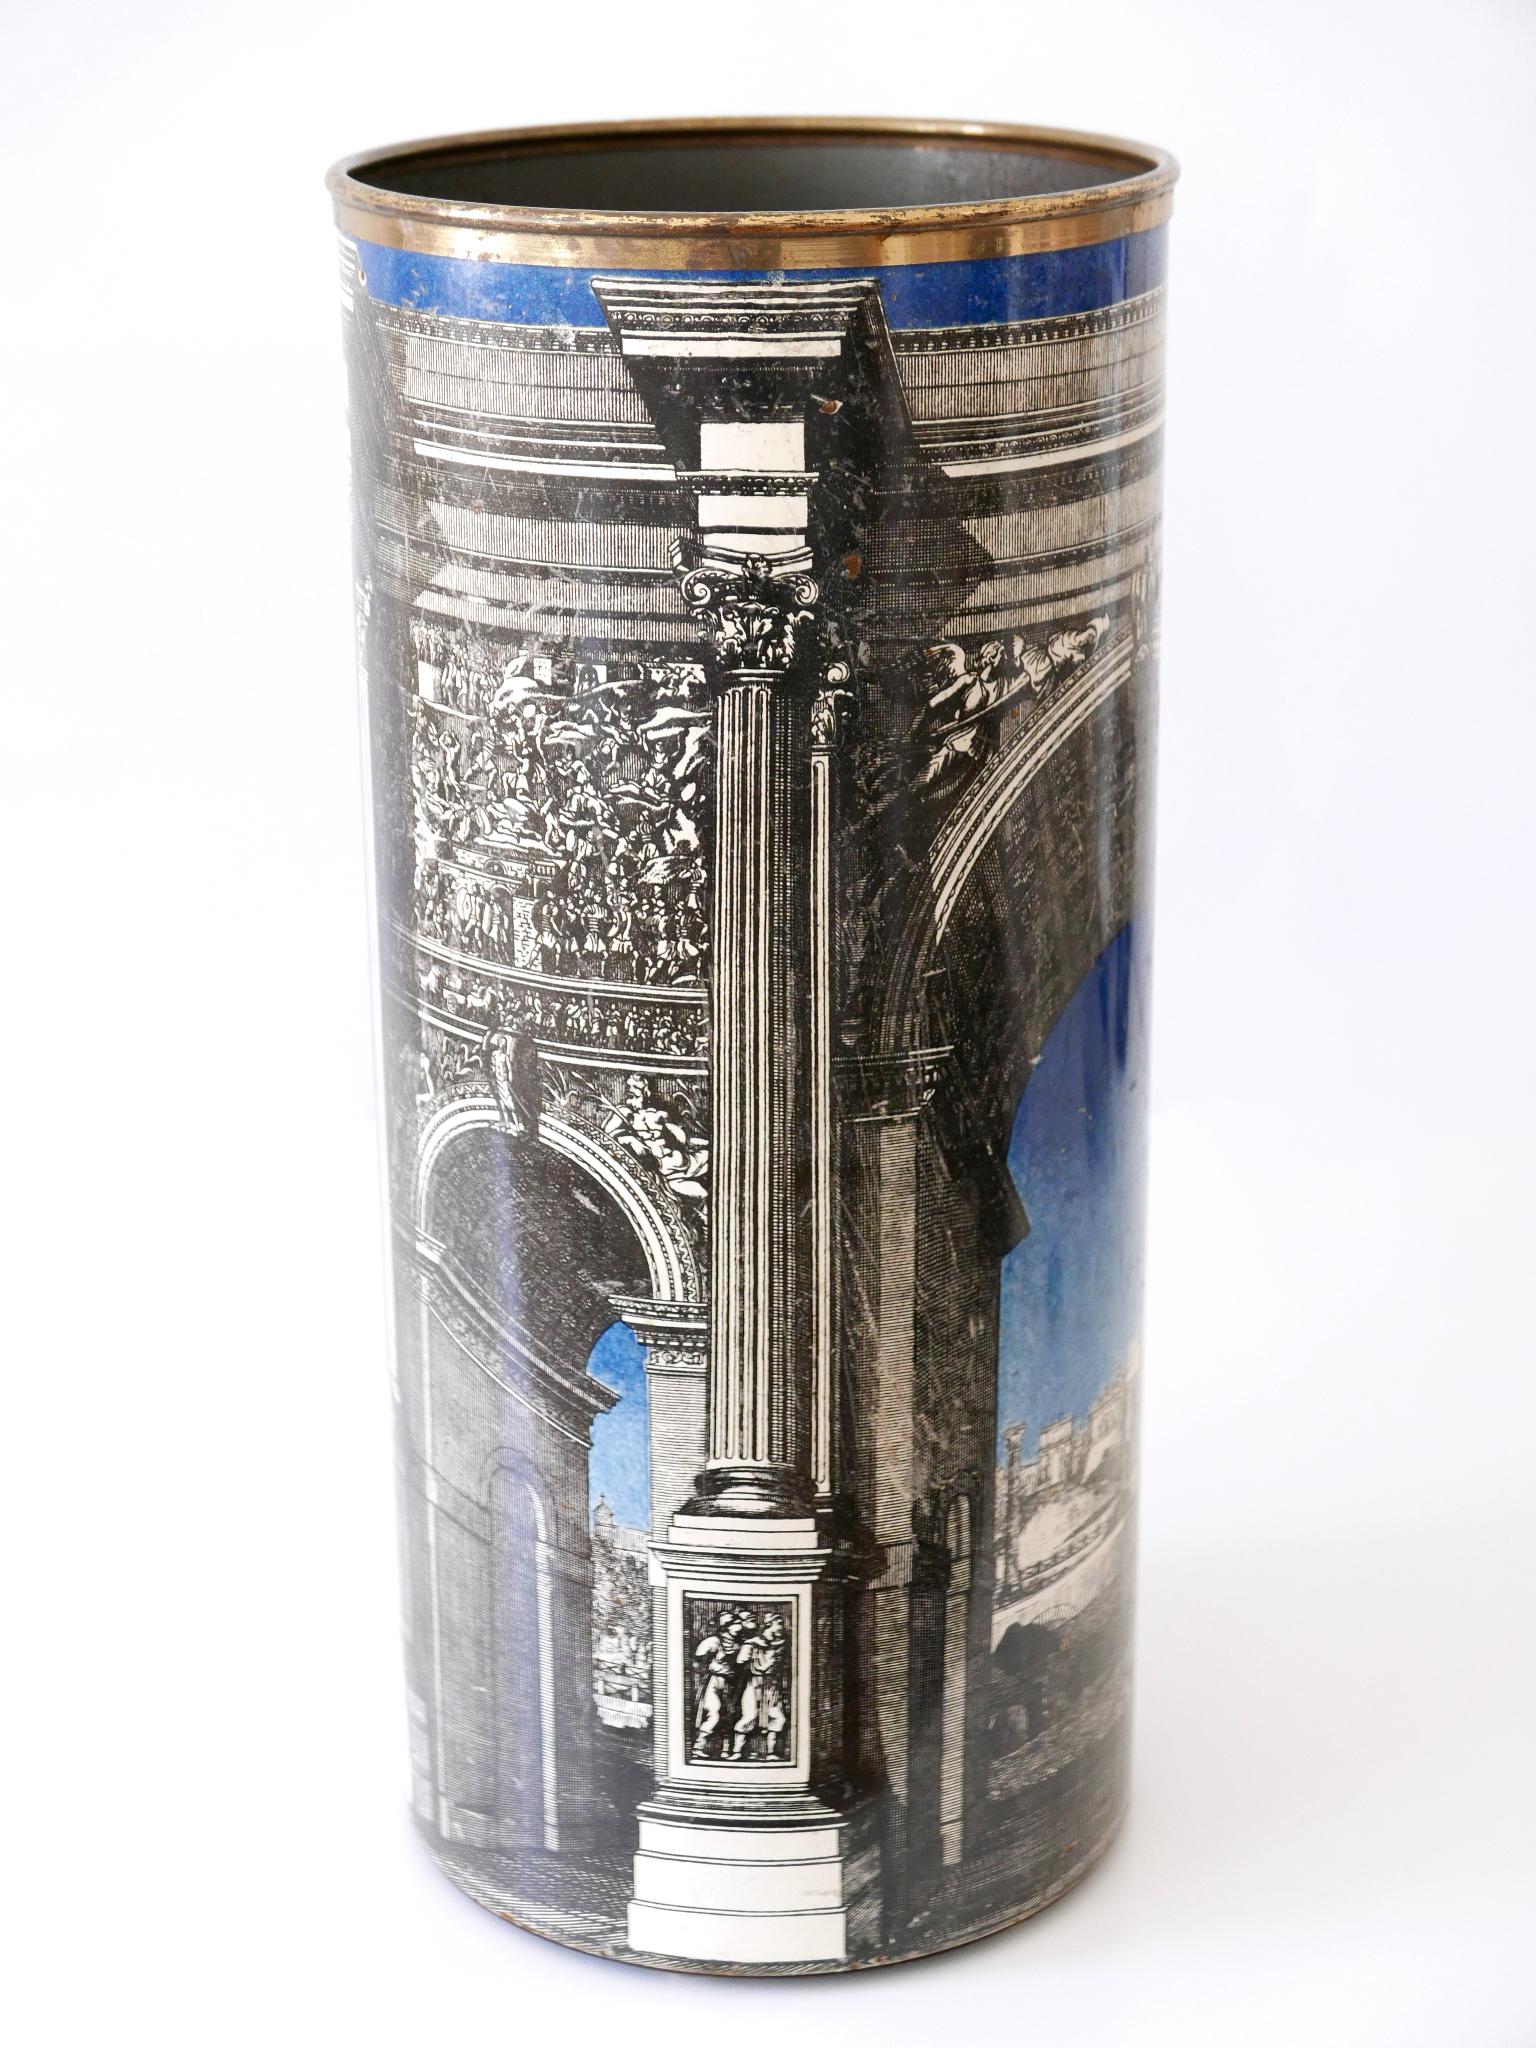 Early Mid-Century Modern 'Roman Arch' Umbrella Stand by Piero Fornasetti 1950s For Sale 5